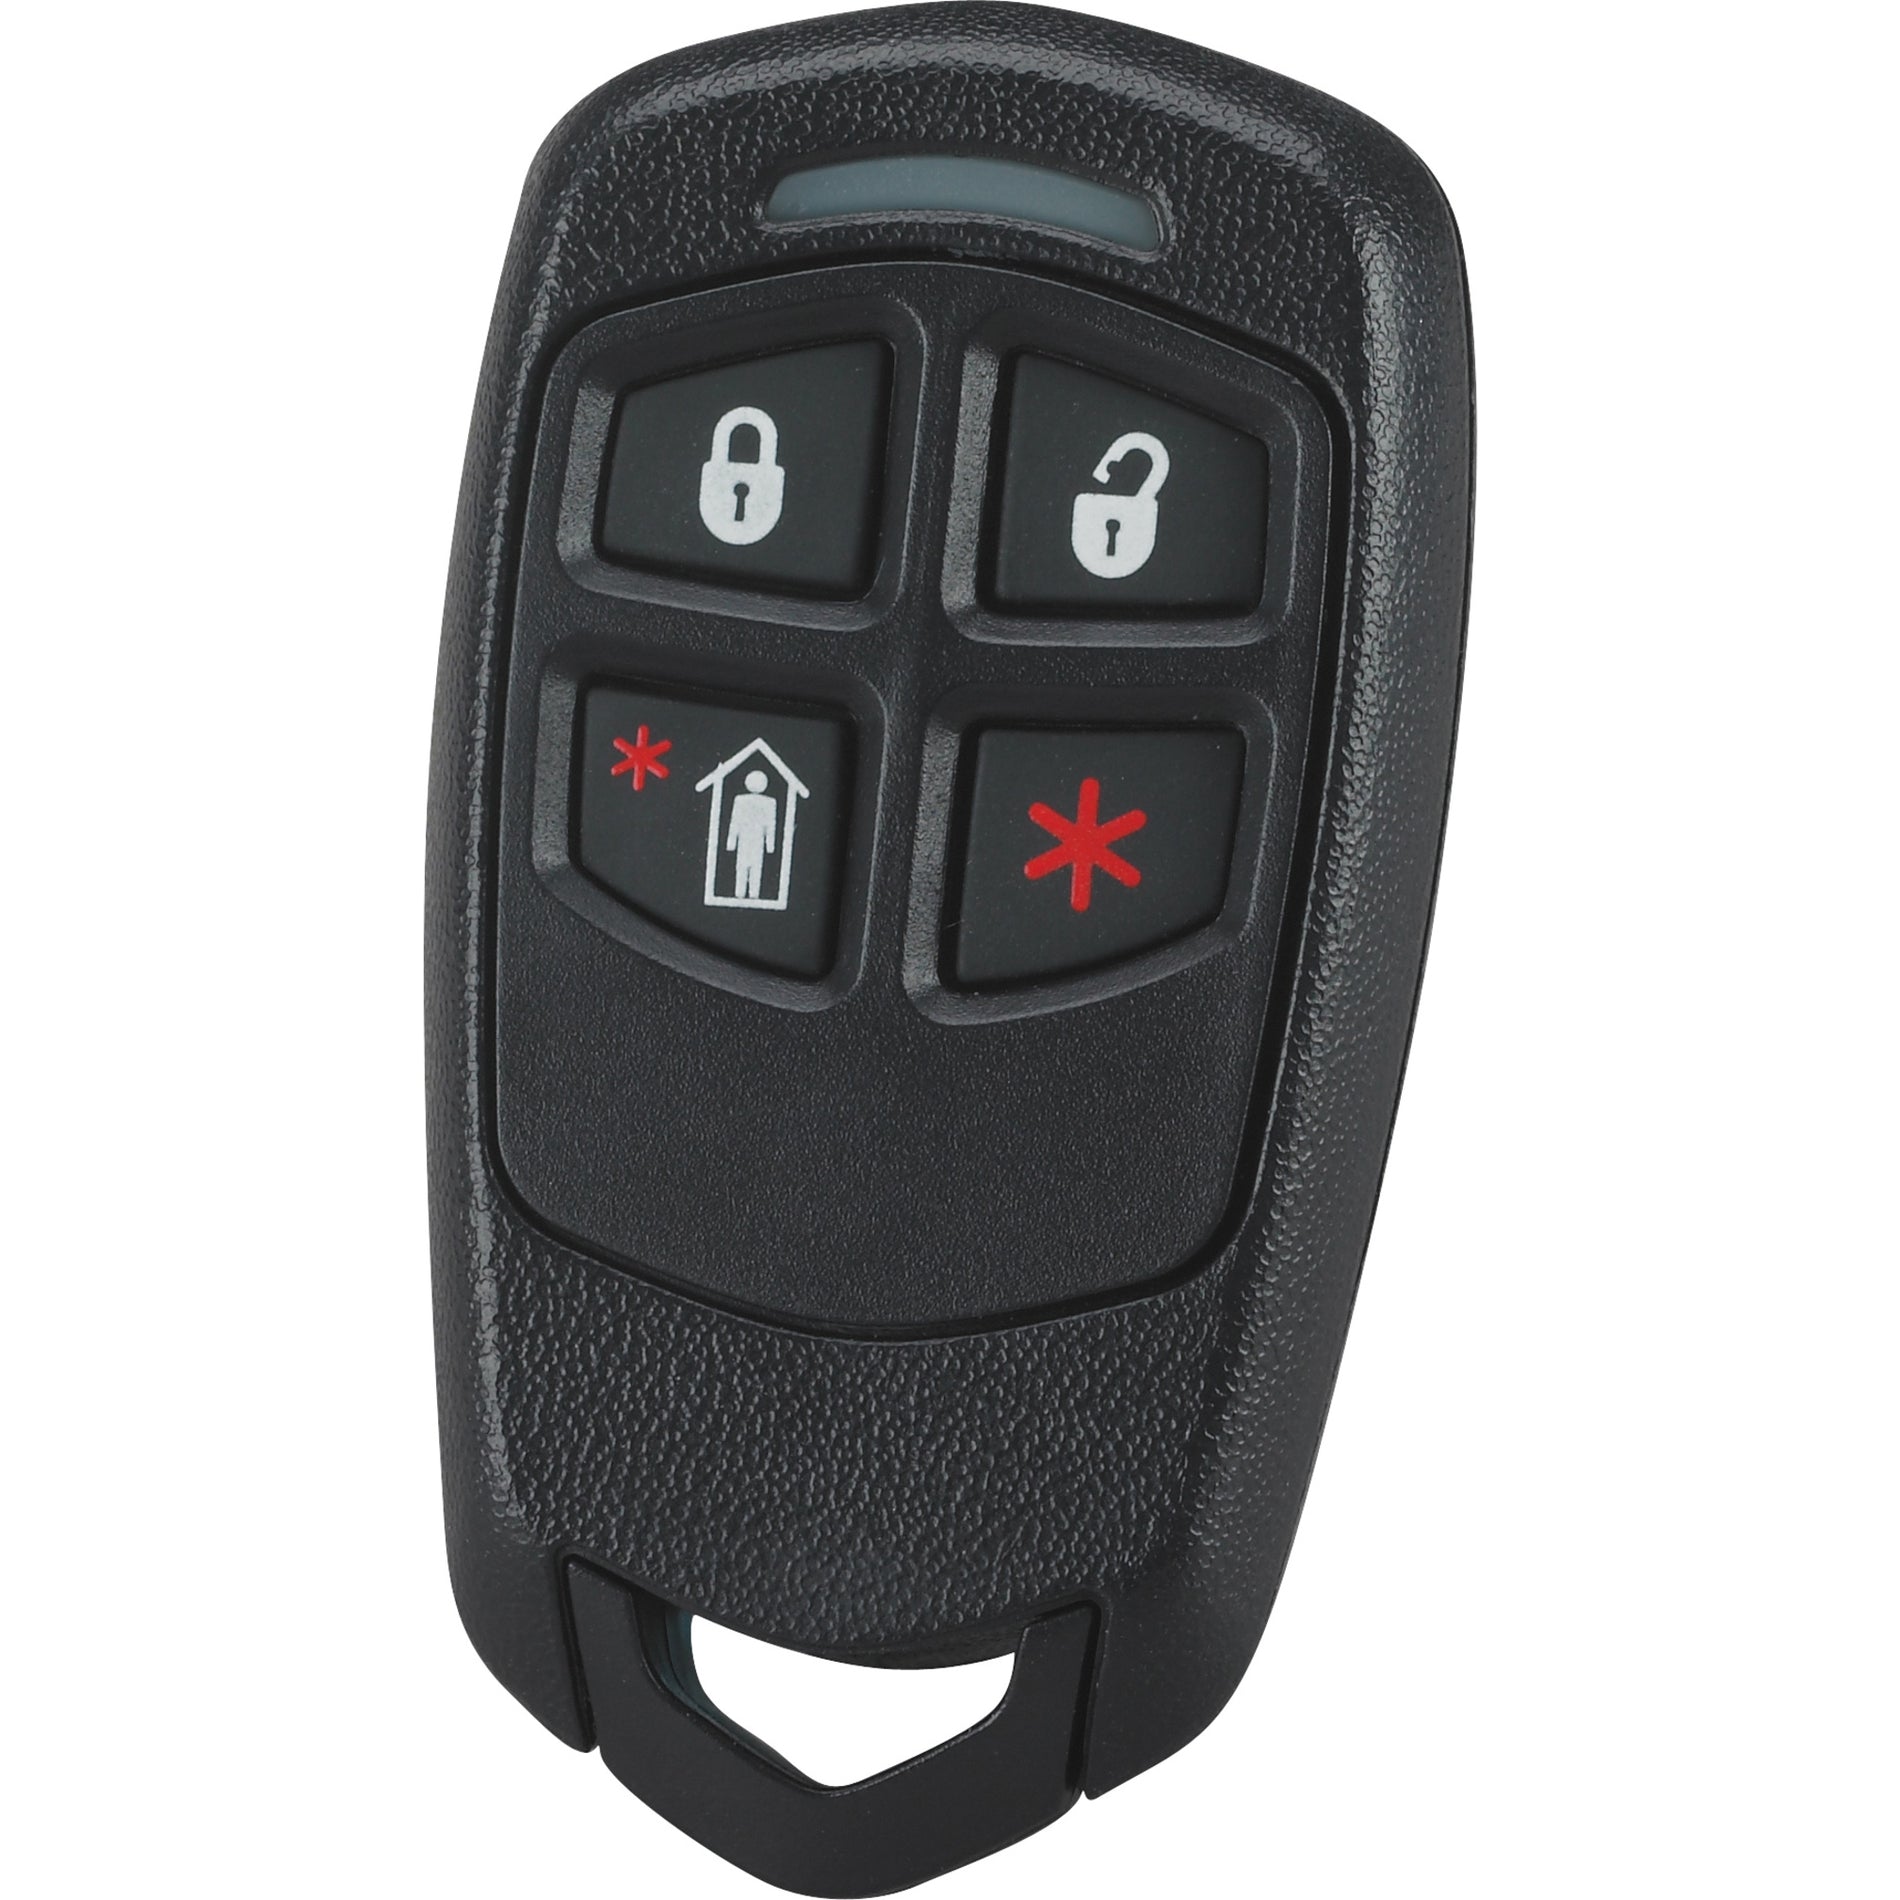 Honeywell Home 5834-4 Wireless Key Fob - Handheld, 4 Buttons, Water Resistant